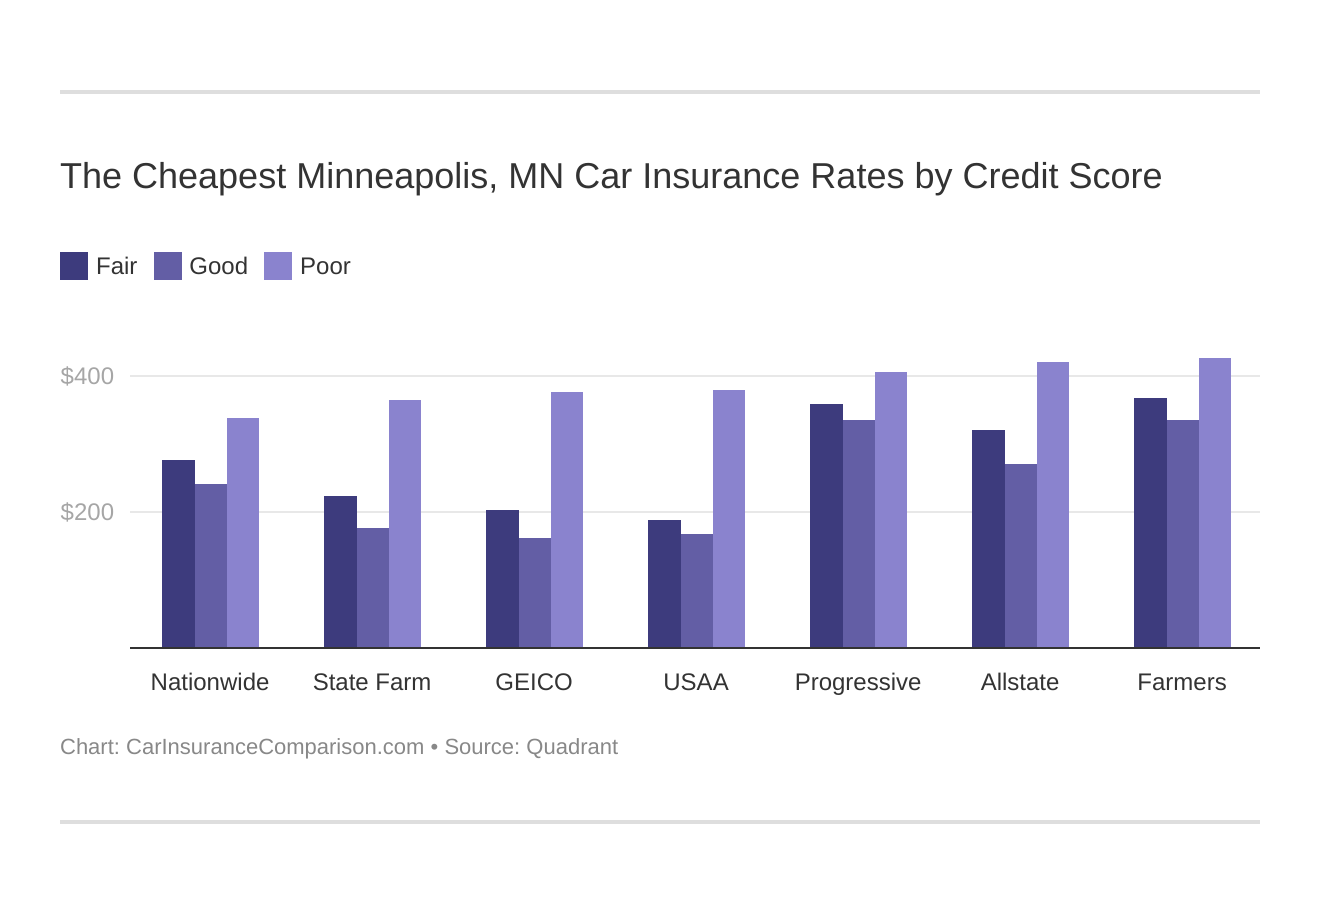 The Cheapest Minneapolis, MN Car Insurance Rates by Credit Score